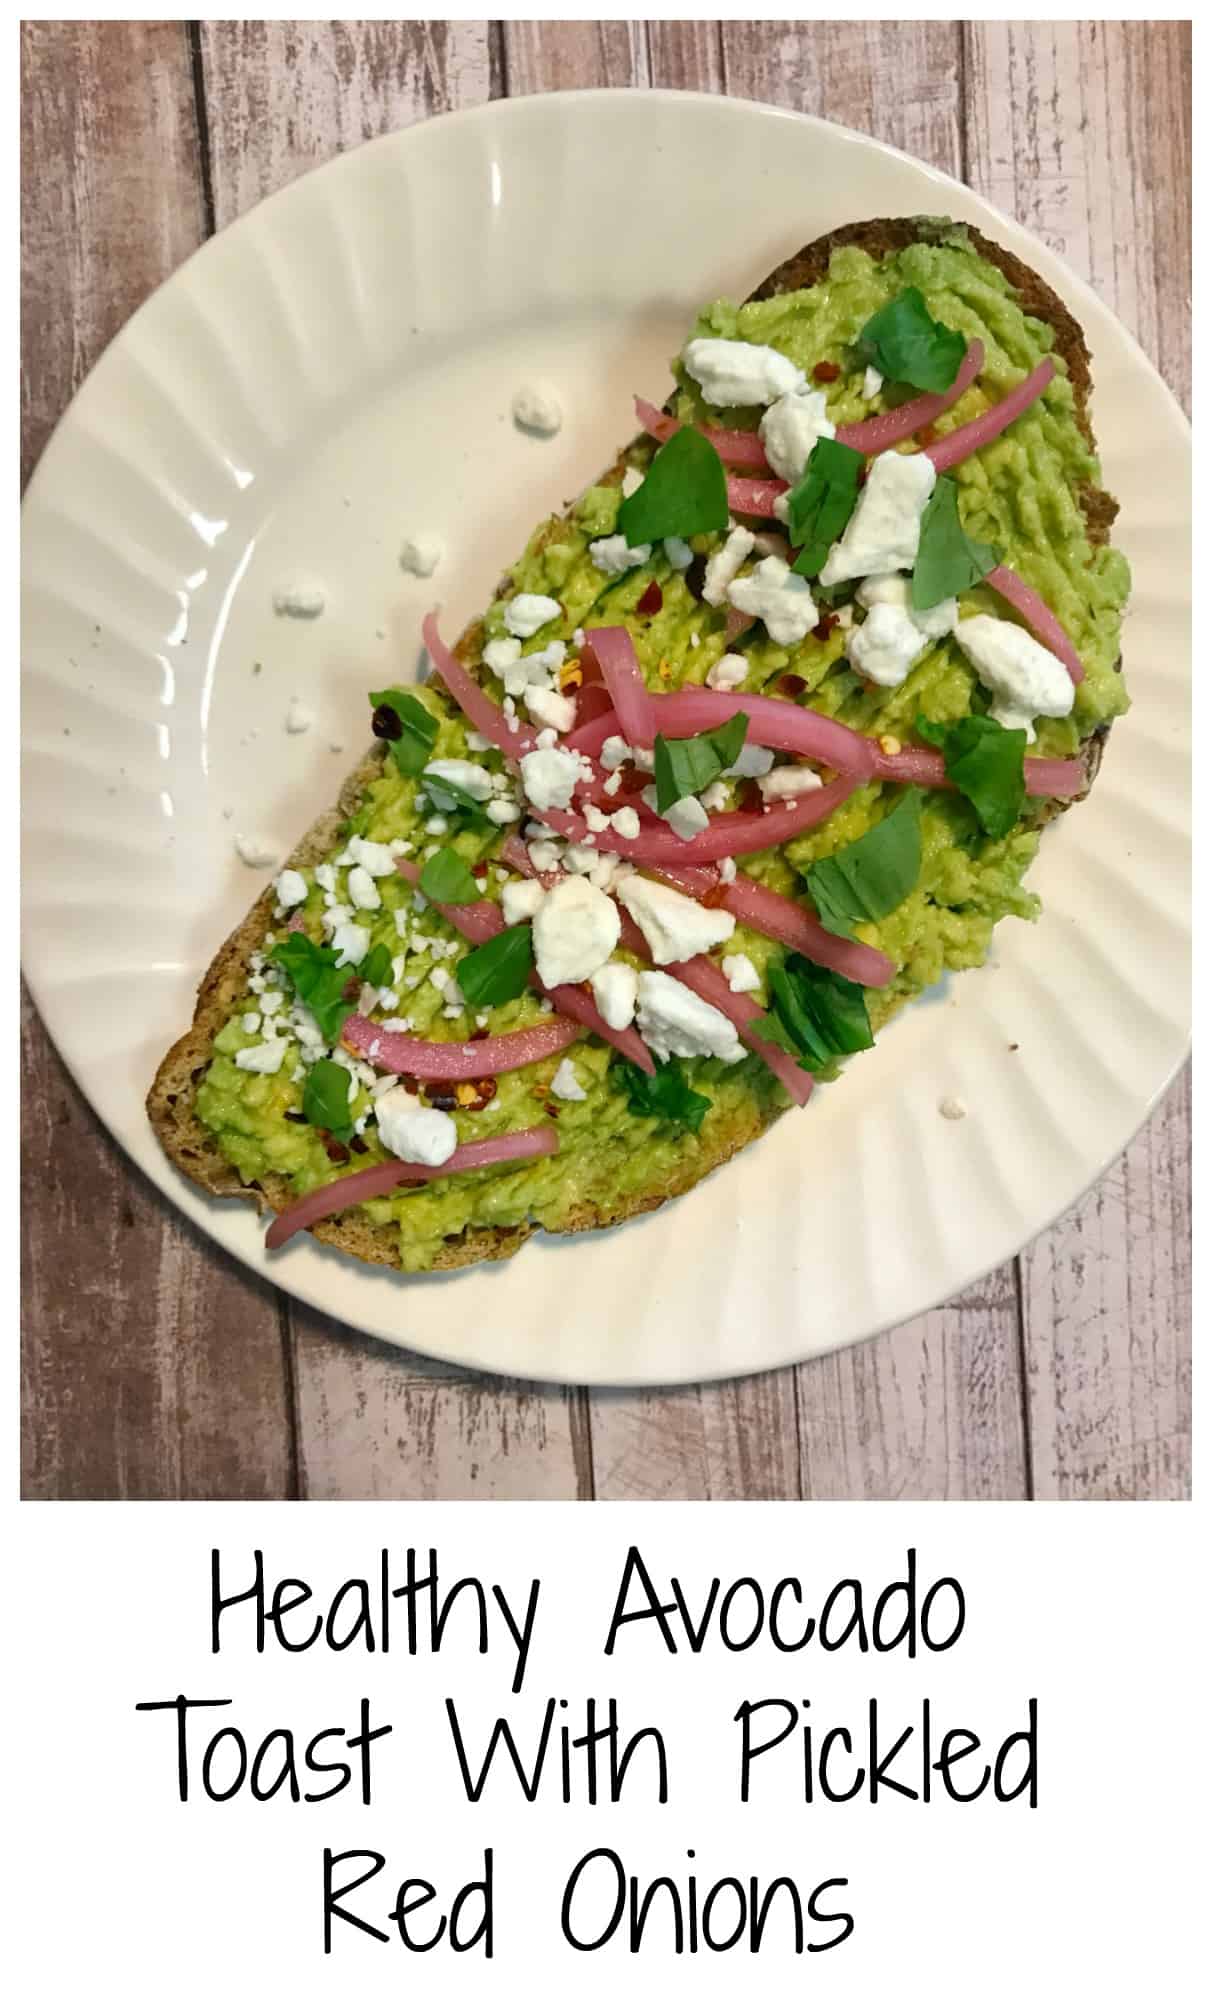 Healthy Avocado Toast With Pickled Red Onions